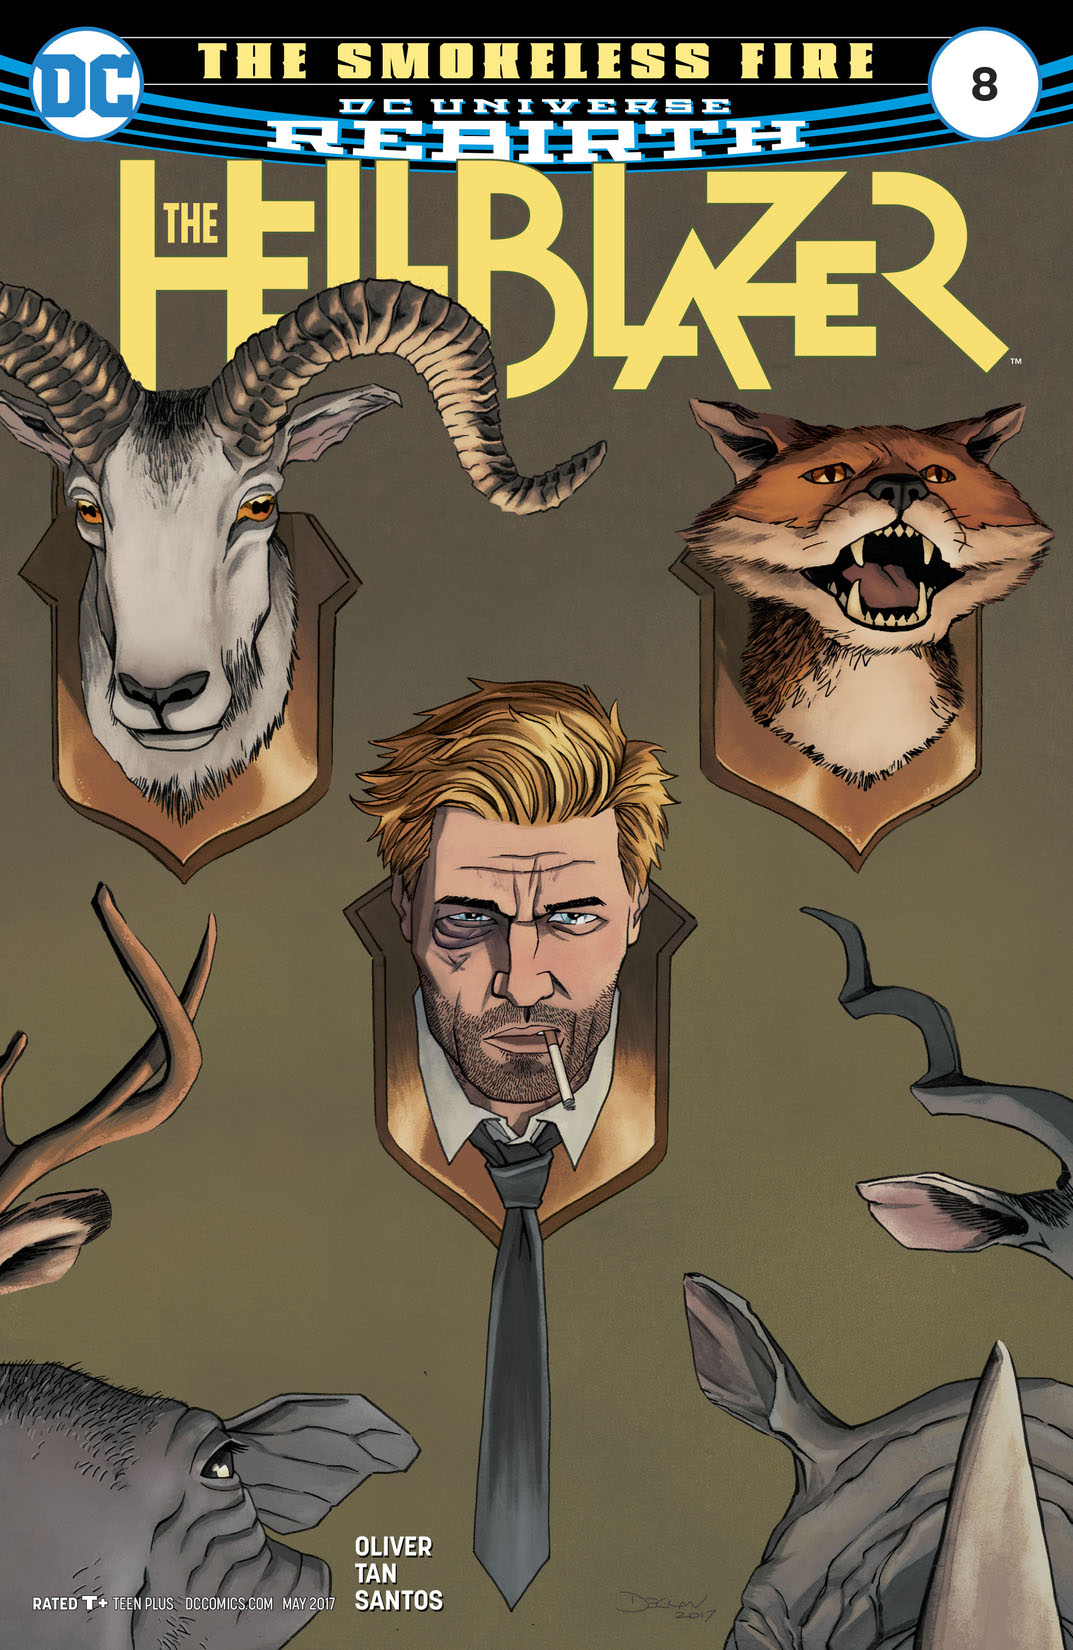 The Hellblazer #8 preview images